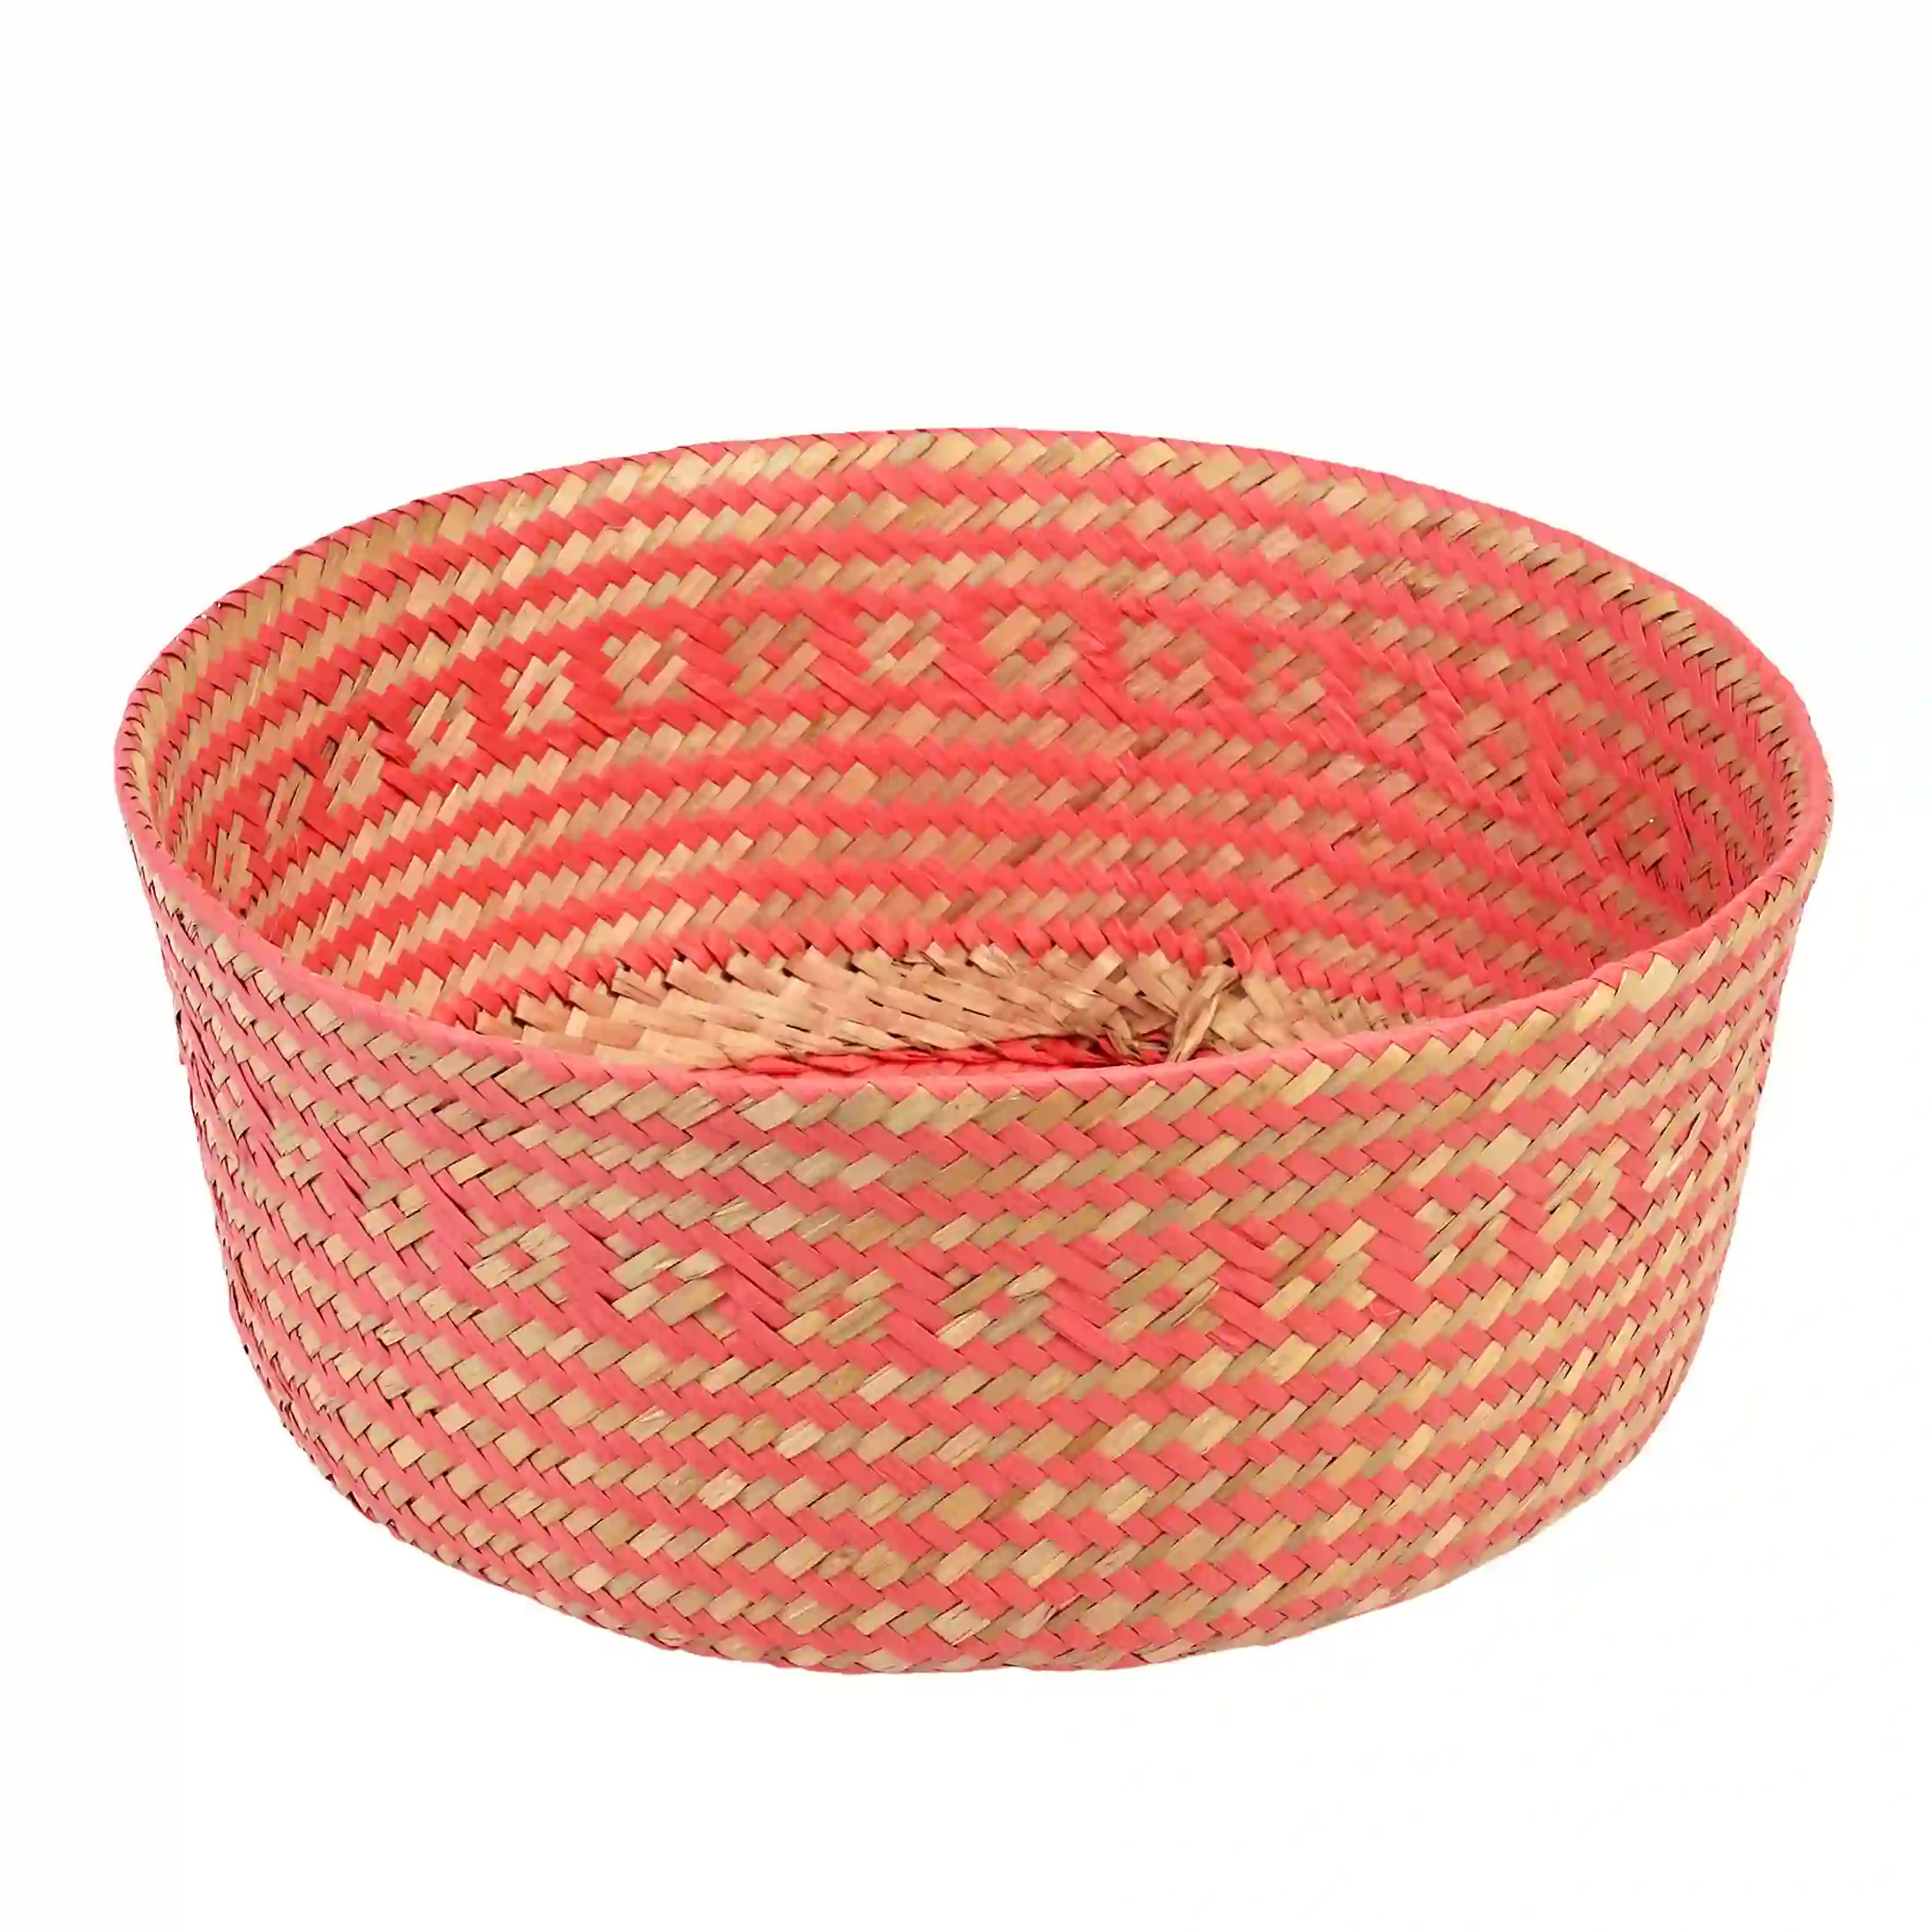 small seagrass basket - coral